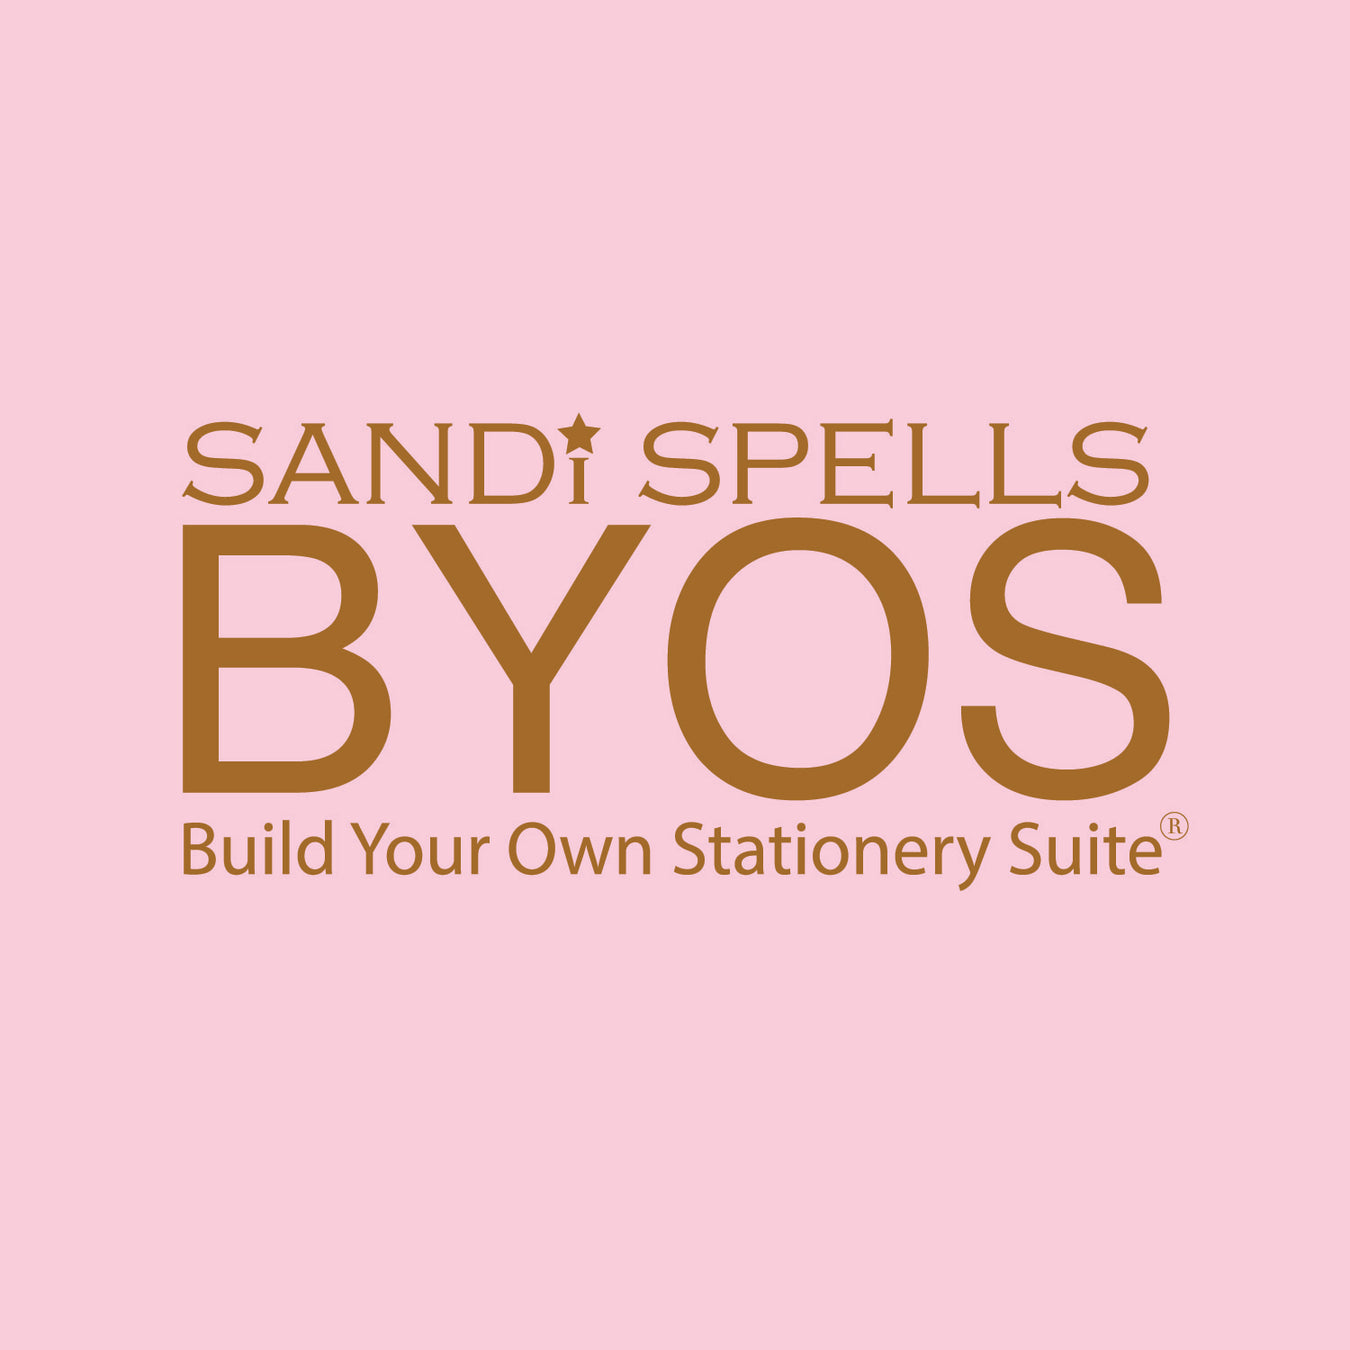 BYOS - Build Your Own Stationery Suite Bundles